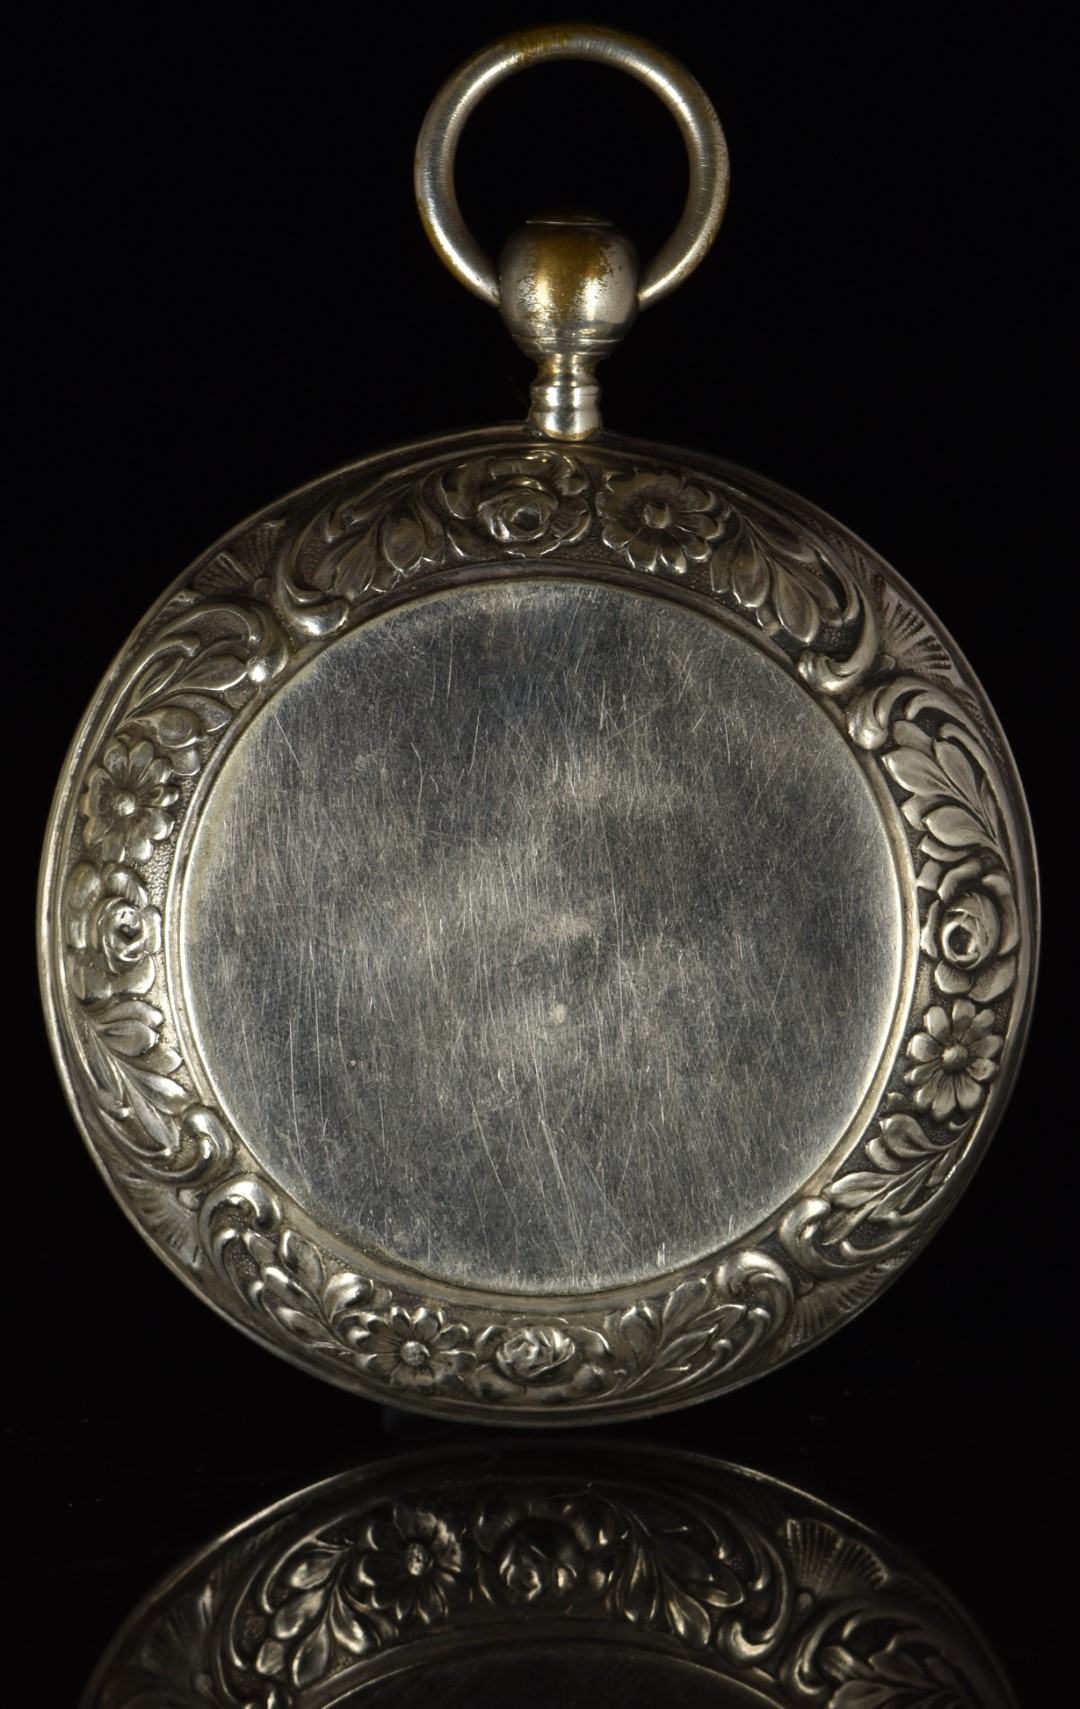 Mummery of Dover white metal full hunter pocket watch with subsidiary seconds dial formed as a - Image 3 of 4